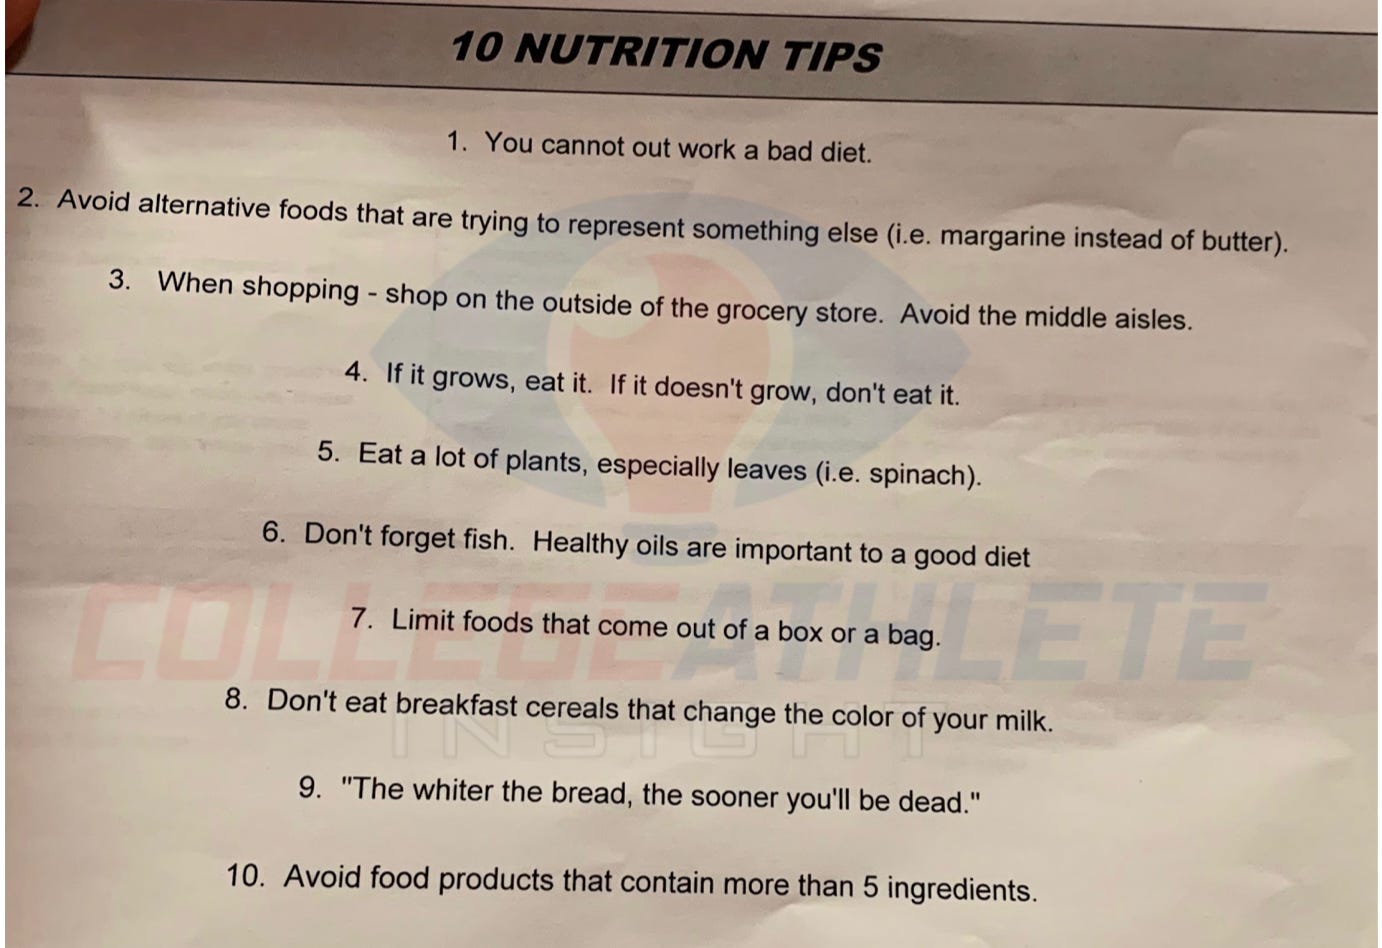 10 nutrition tips 